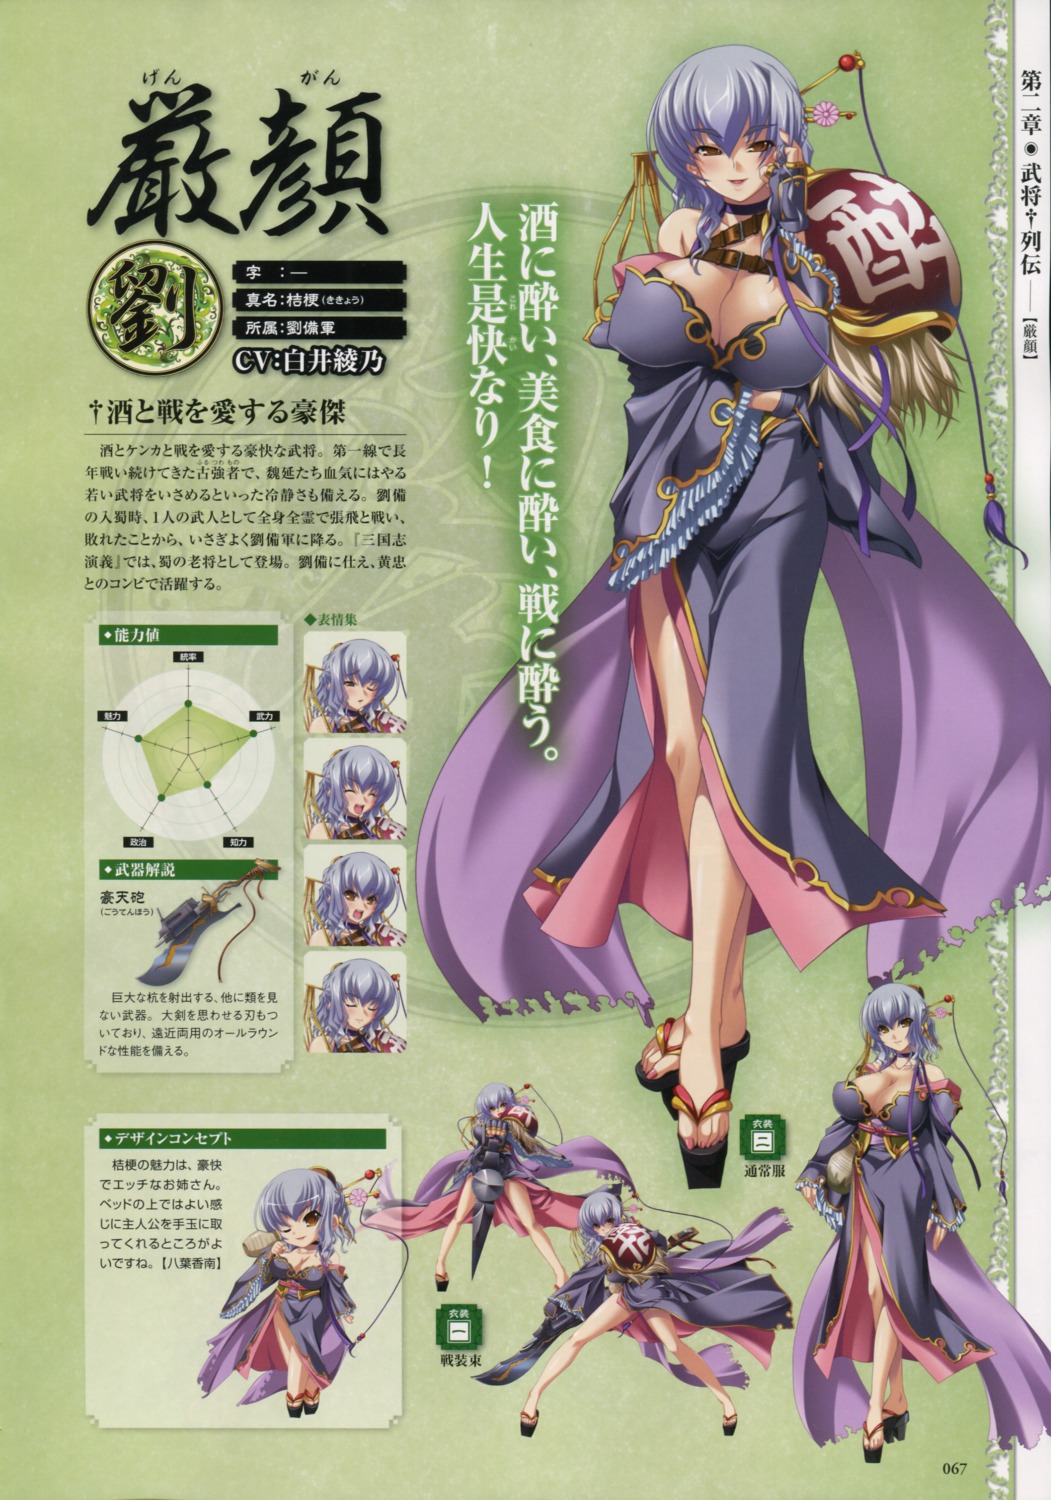 asian_clothes baseson character_design chibi cleavage dress expression gengan koihime_musou profile_page weapon